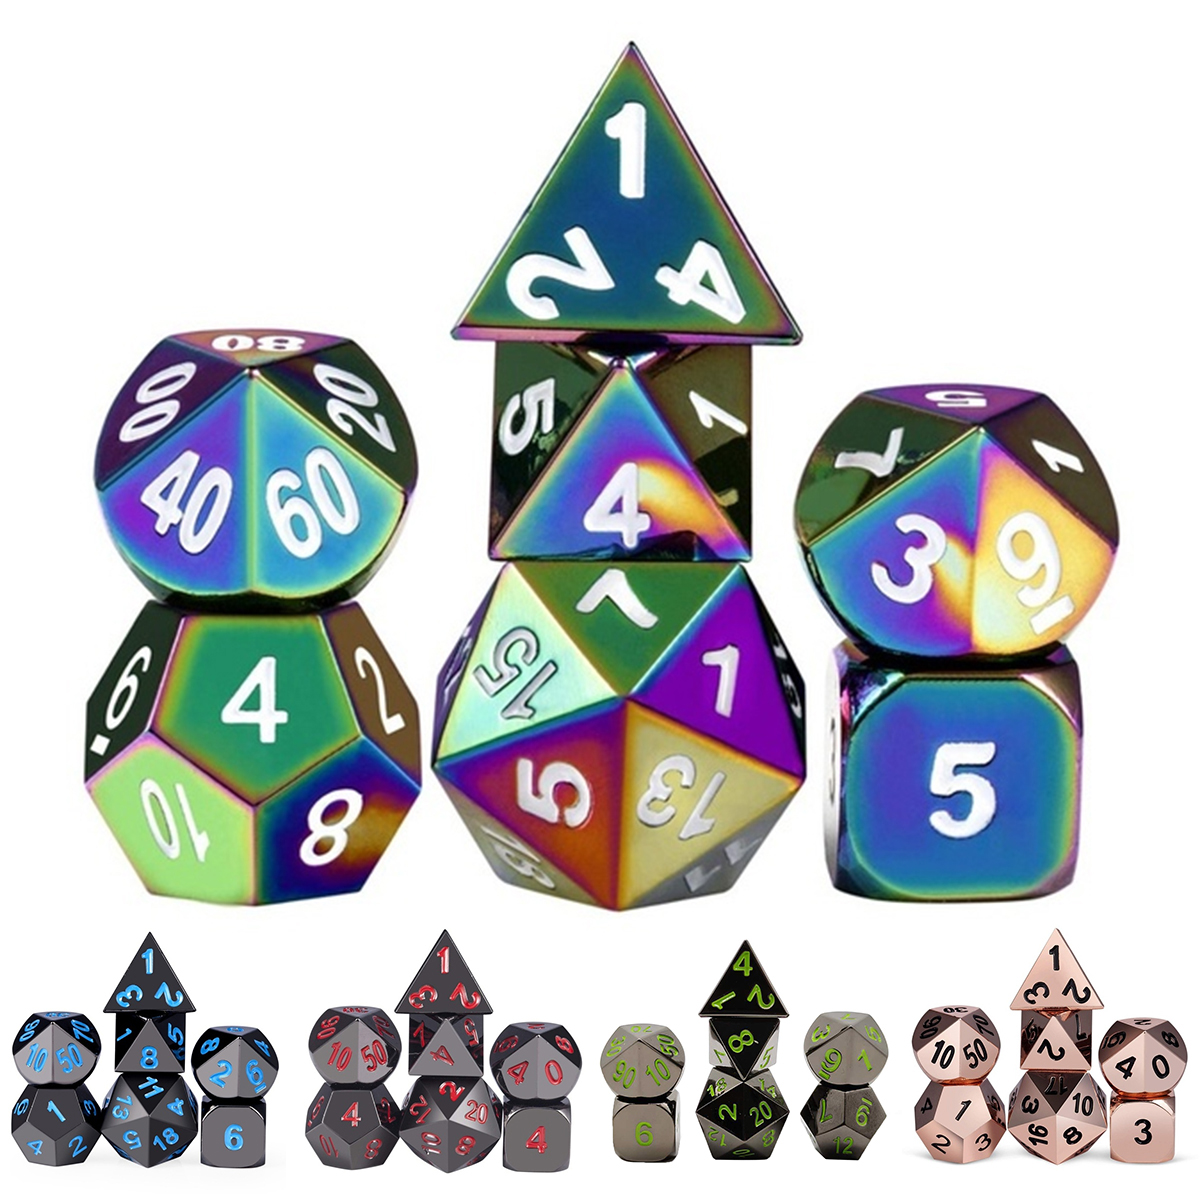 7-PcsSet-Metal-Dice-Set-Role-Playing-Dragons-Table-Game-With-Cloth-Bag-Bar-Party-Game-Dice-1677684-8